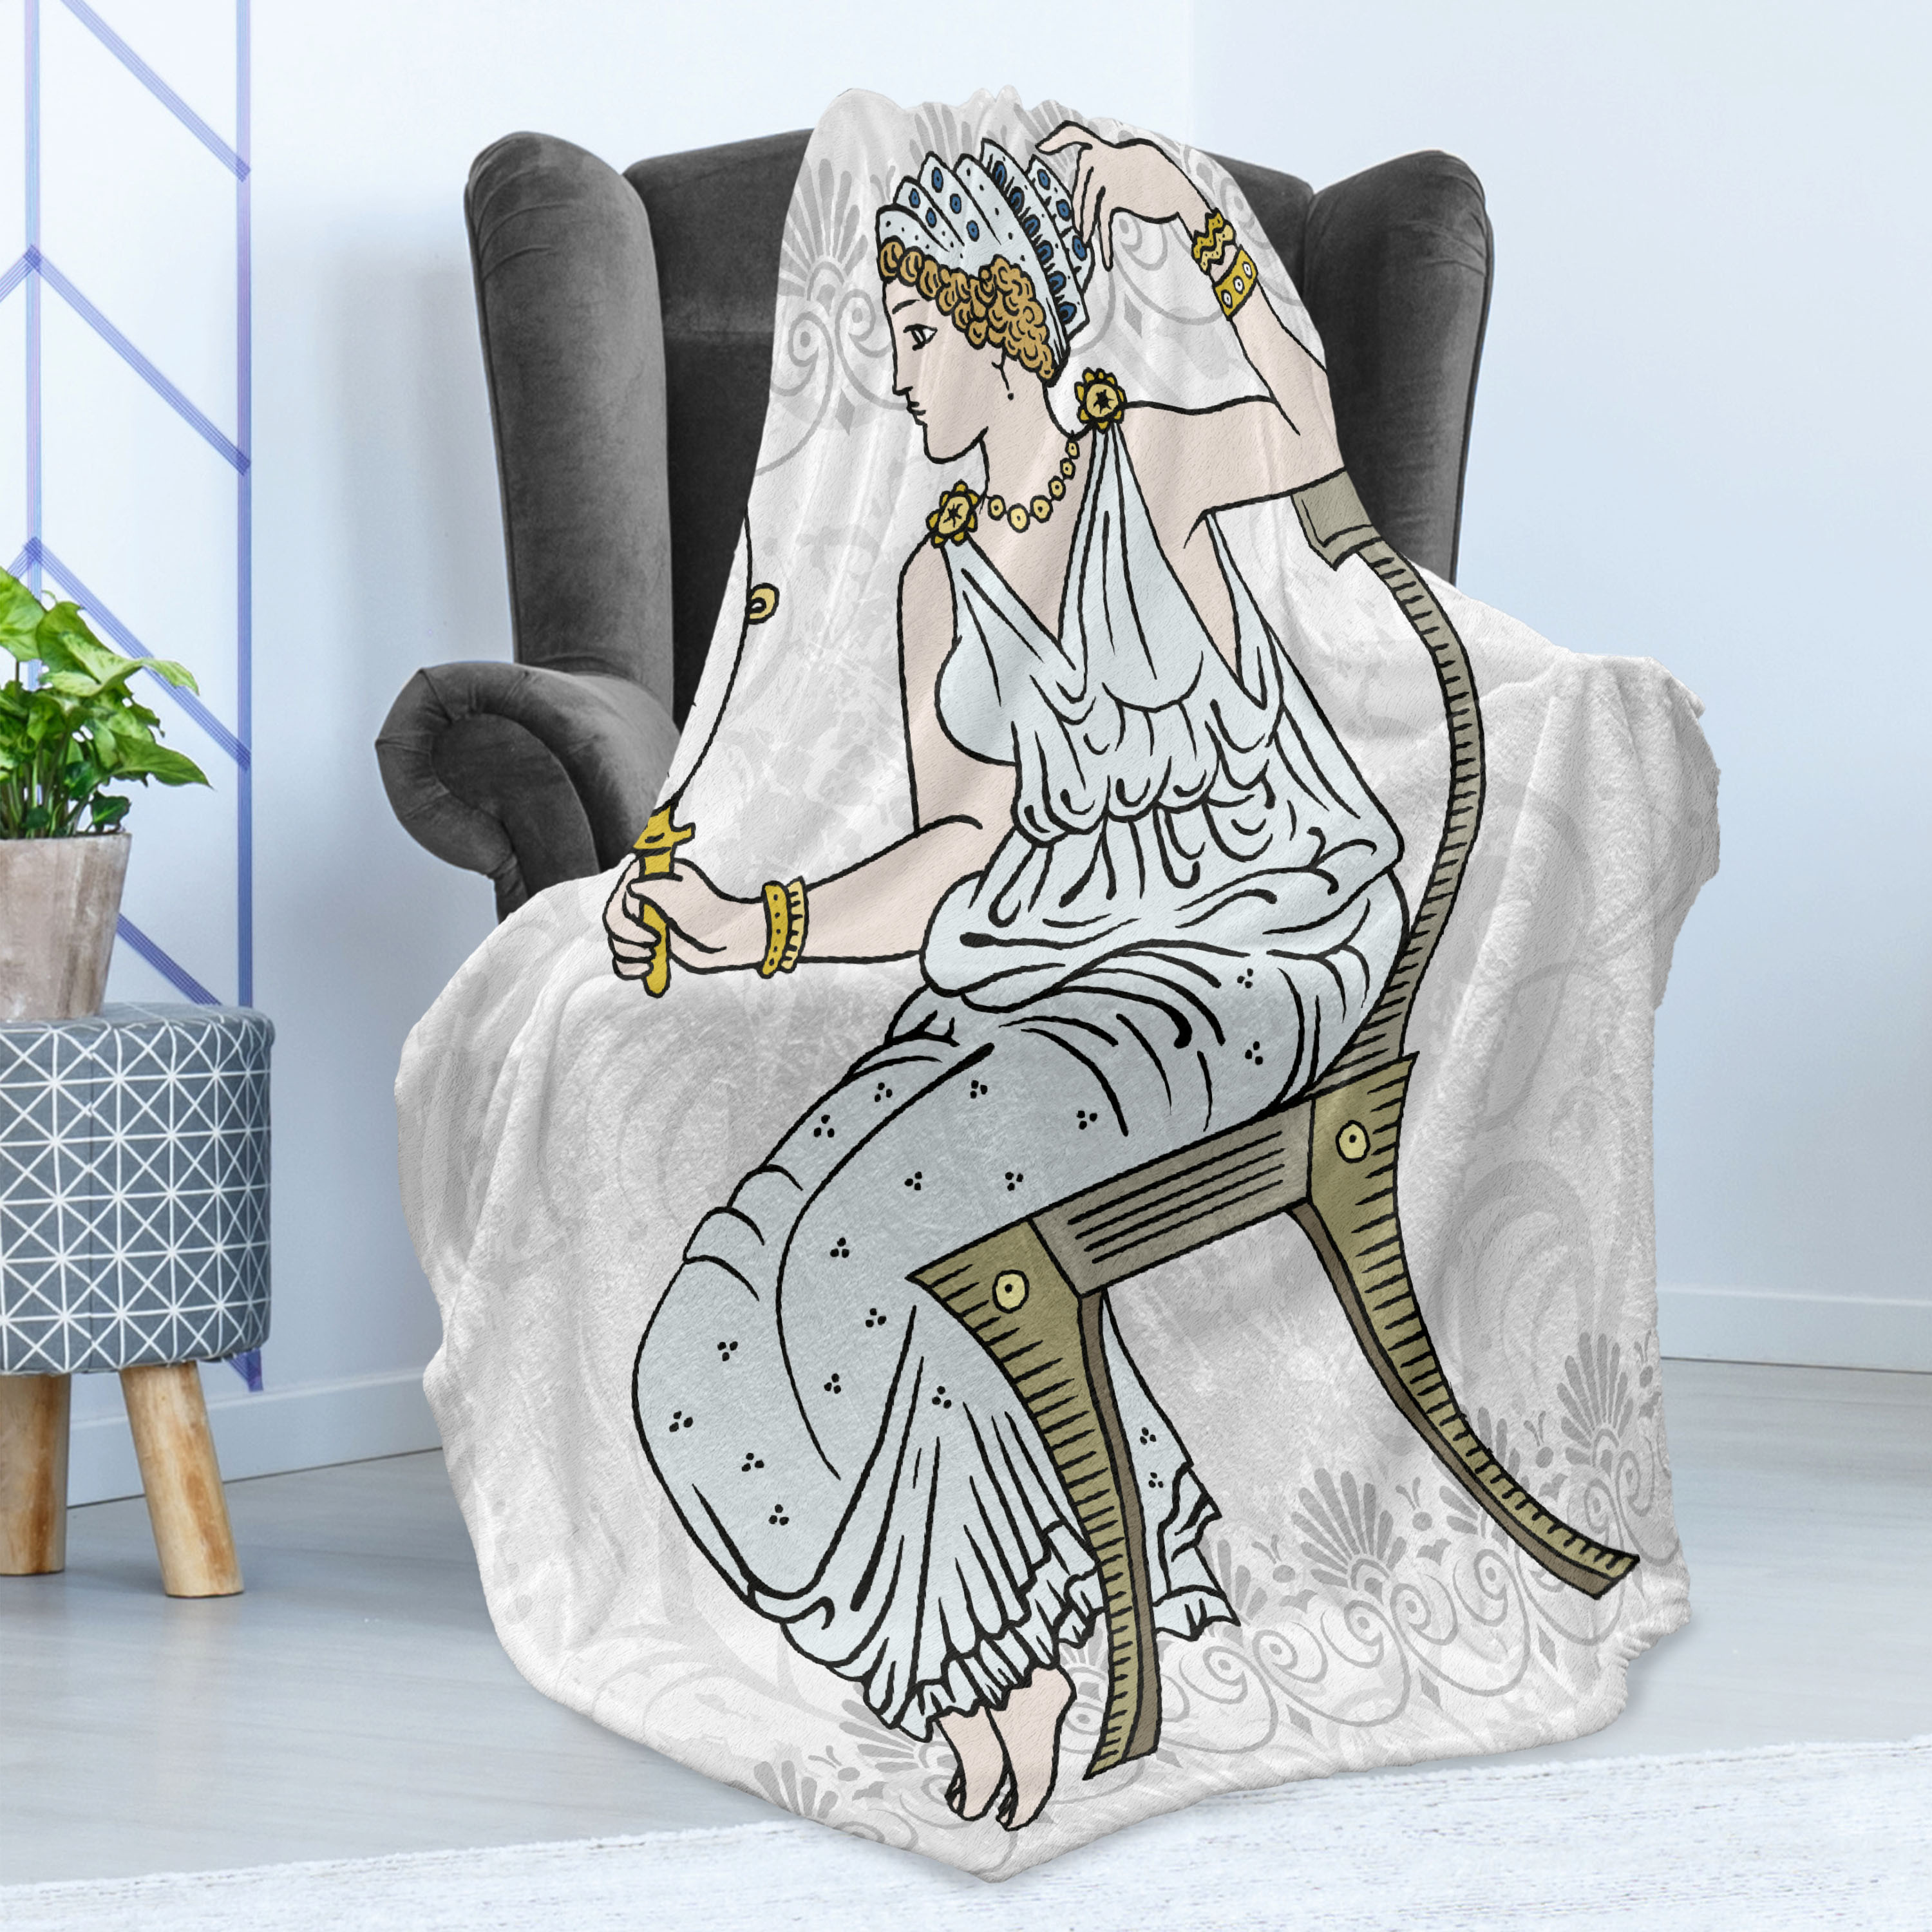 Venus Soft Flannel Fleece Blanket, Greek Woman Silhouette in Toga Sitting on a Chair Holding a Mirror Roman Illustration, Cozy Plush for Indoor and Outdoor Use, 70" x 90", Multicolor, by Ambesonne - image 4 of 5